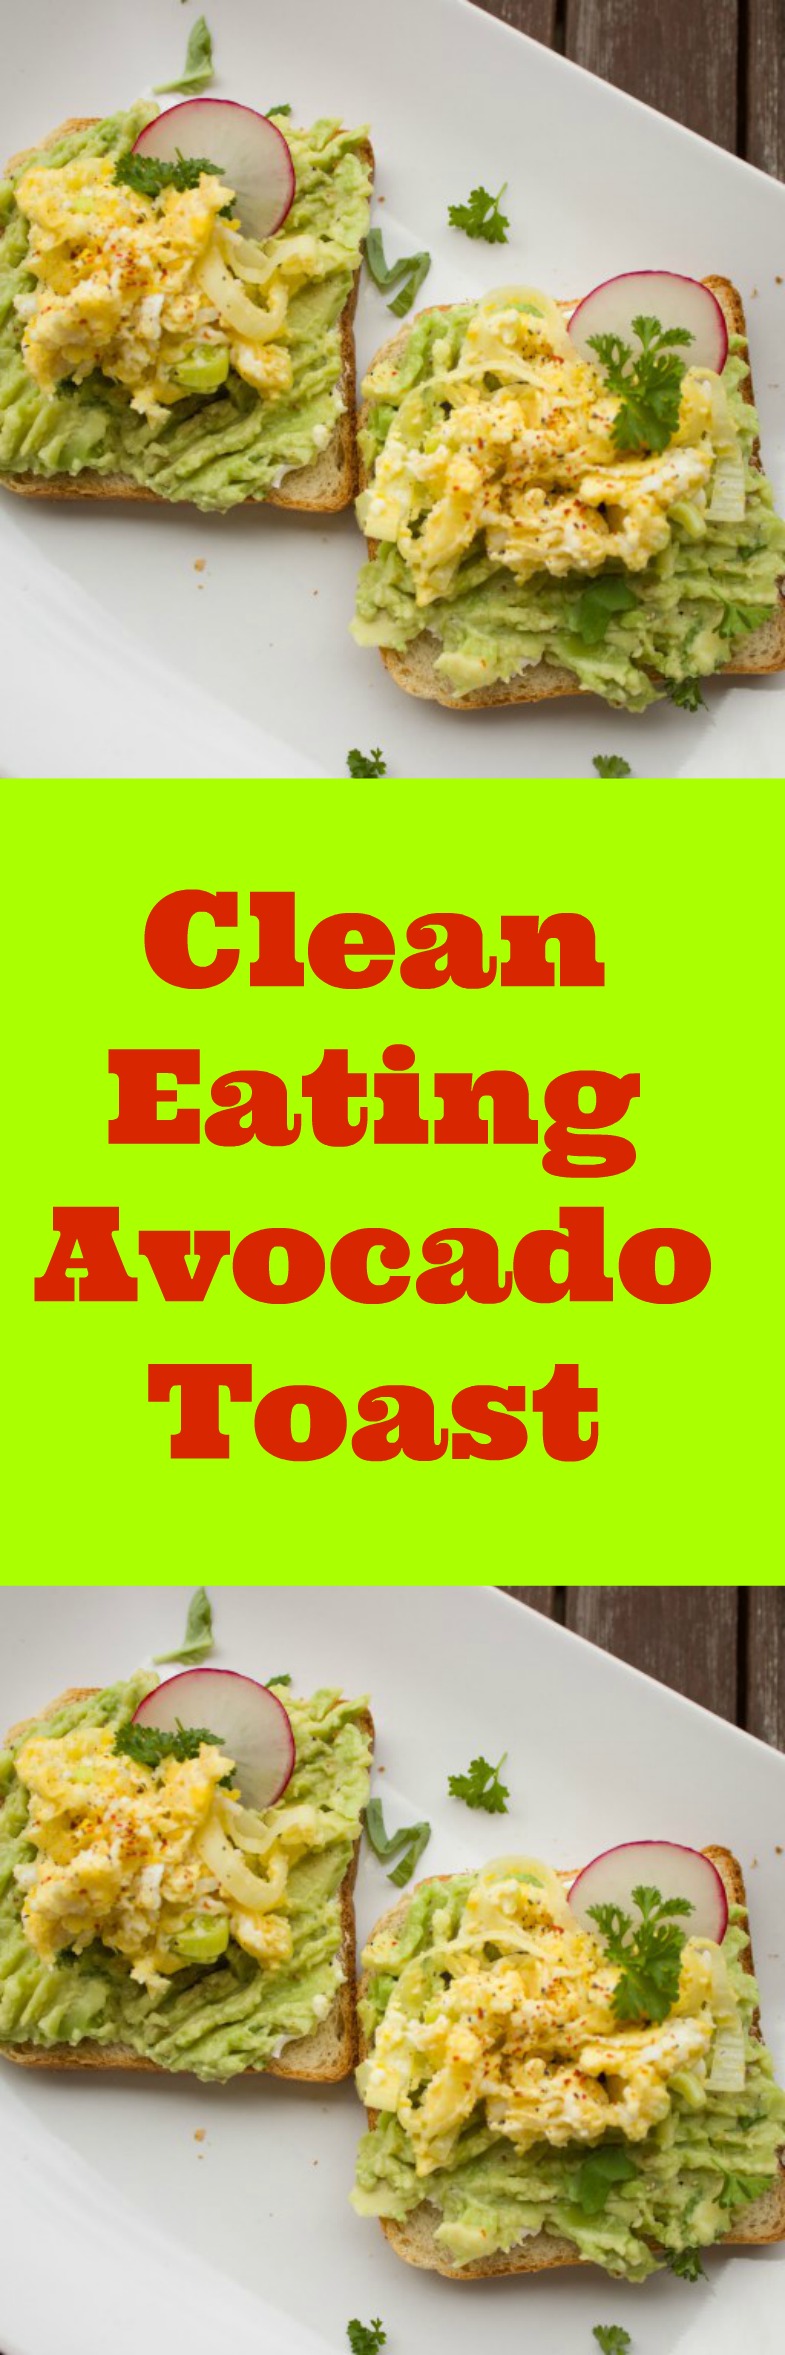 Detox your system with this approved clean eating avocado toast with egg and radish. Low carb meals for weight loss made easy. Choose the right Diet and exercise and you will achieve your goals.